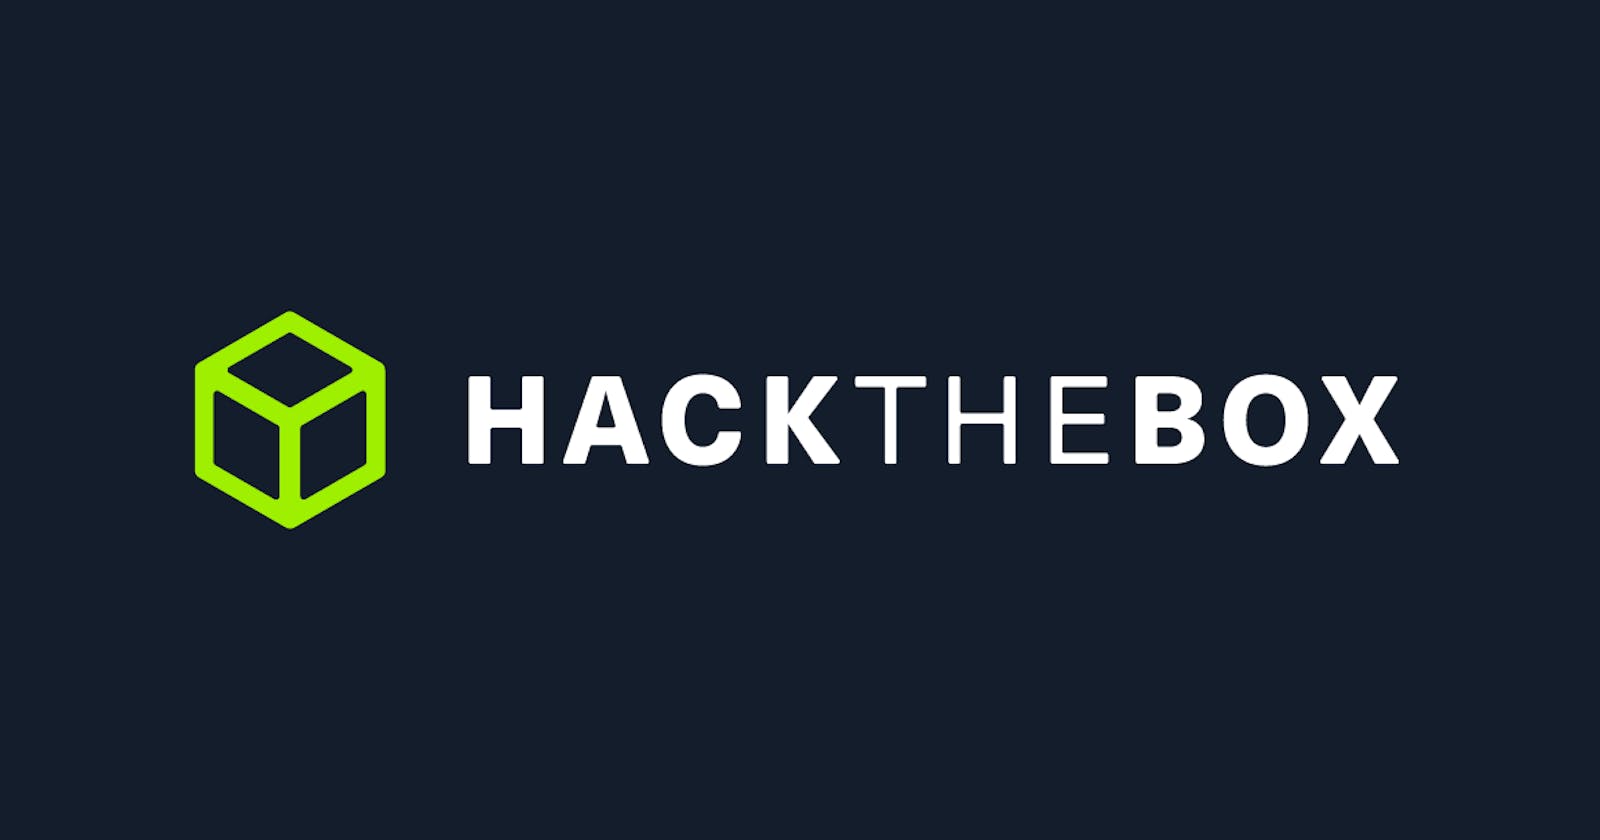 Squashed Hackthebox